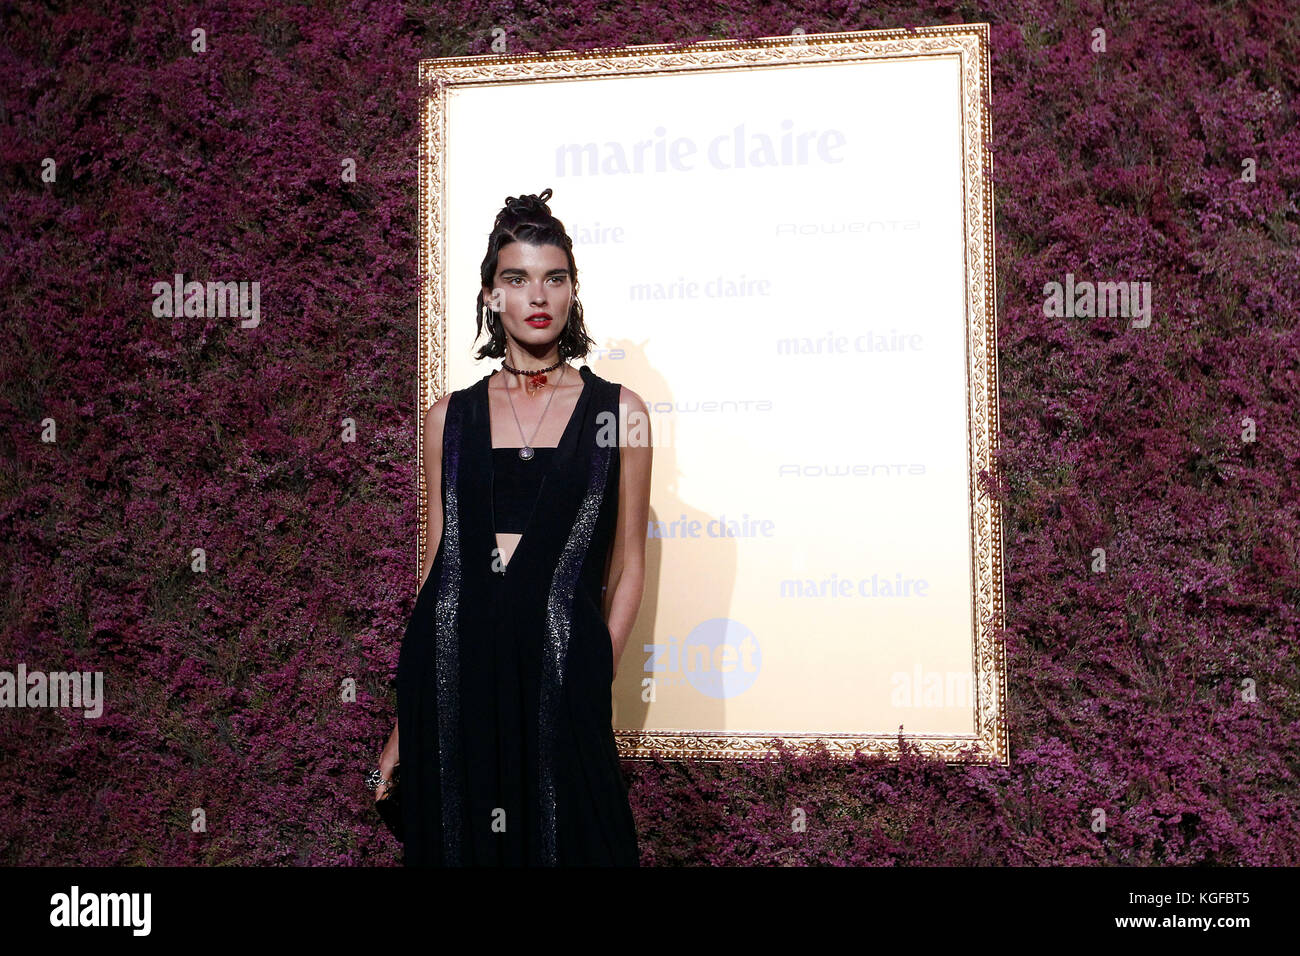 Madrid, Spain. 7th Nov, 2017. Model Crystal Renn during the 15 edition of 'Marie Claire Fashion Prix' Awards in Madrid on Tuesday 07, November 2017. Credit: Gtres Información más Comuniación on line, S.L./Alamy Live News Stock Photo